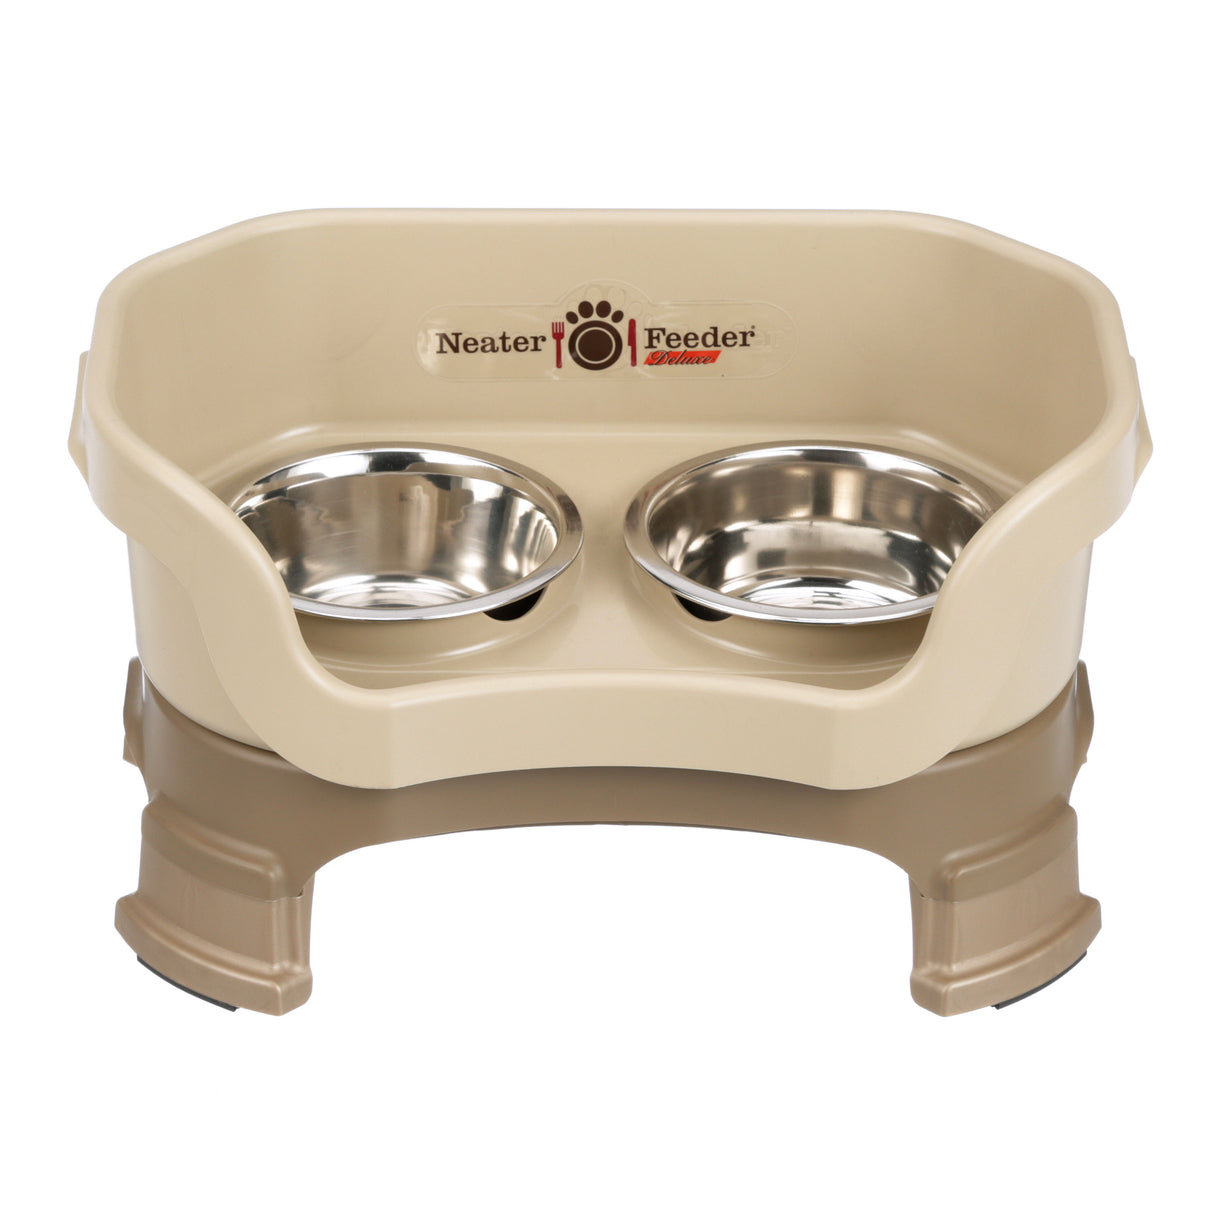 Deluxe Small Dog Cappuccino raised Neater Feeder with leg extensions dog bowls